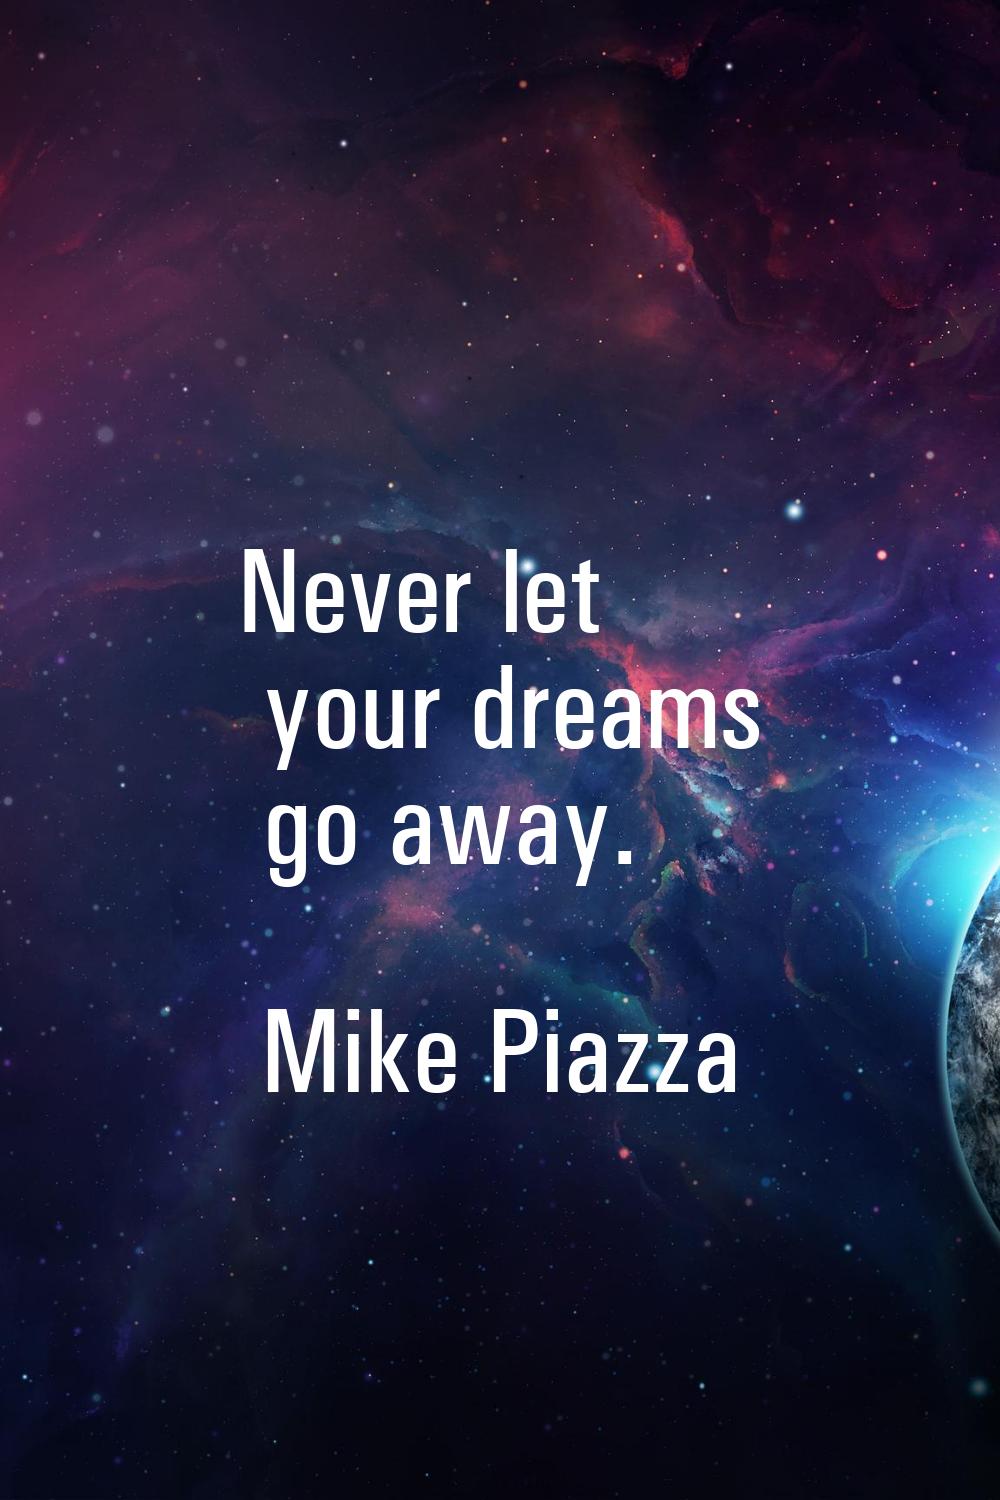 Never let your dreams go away.